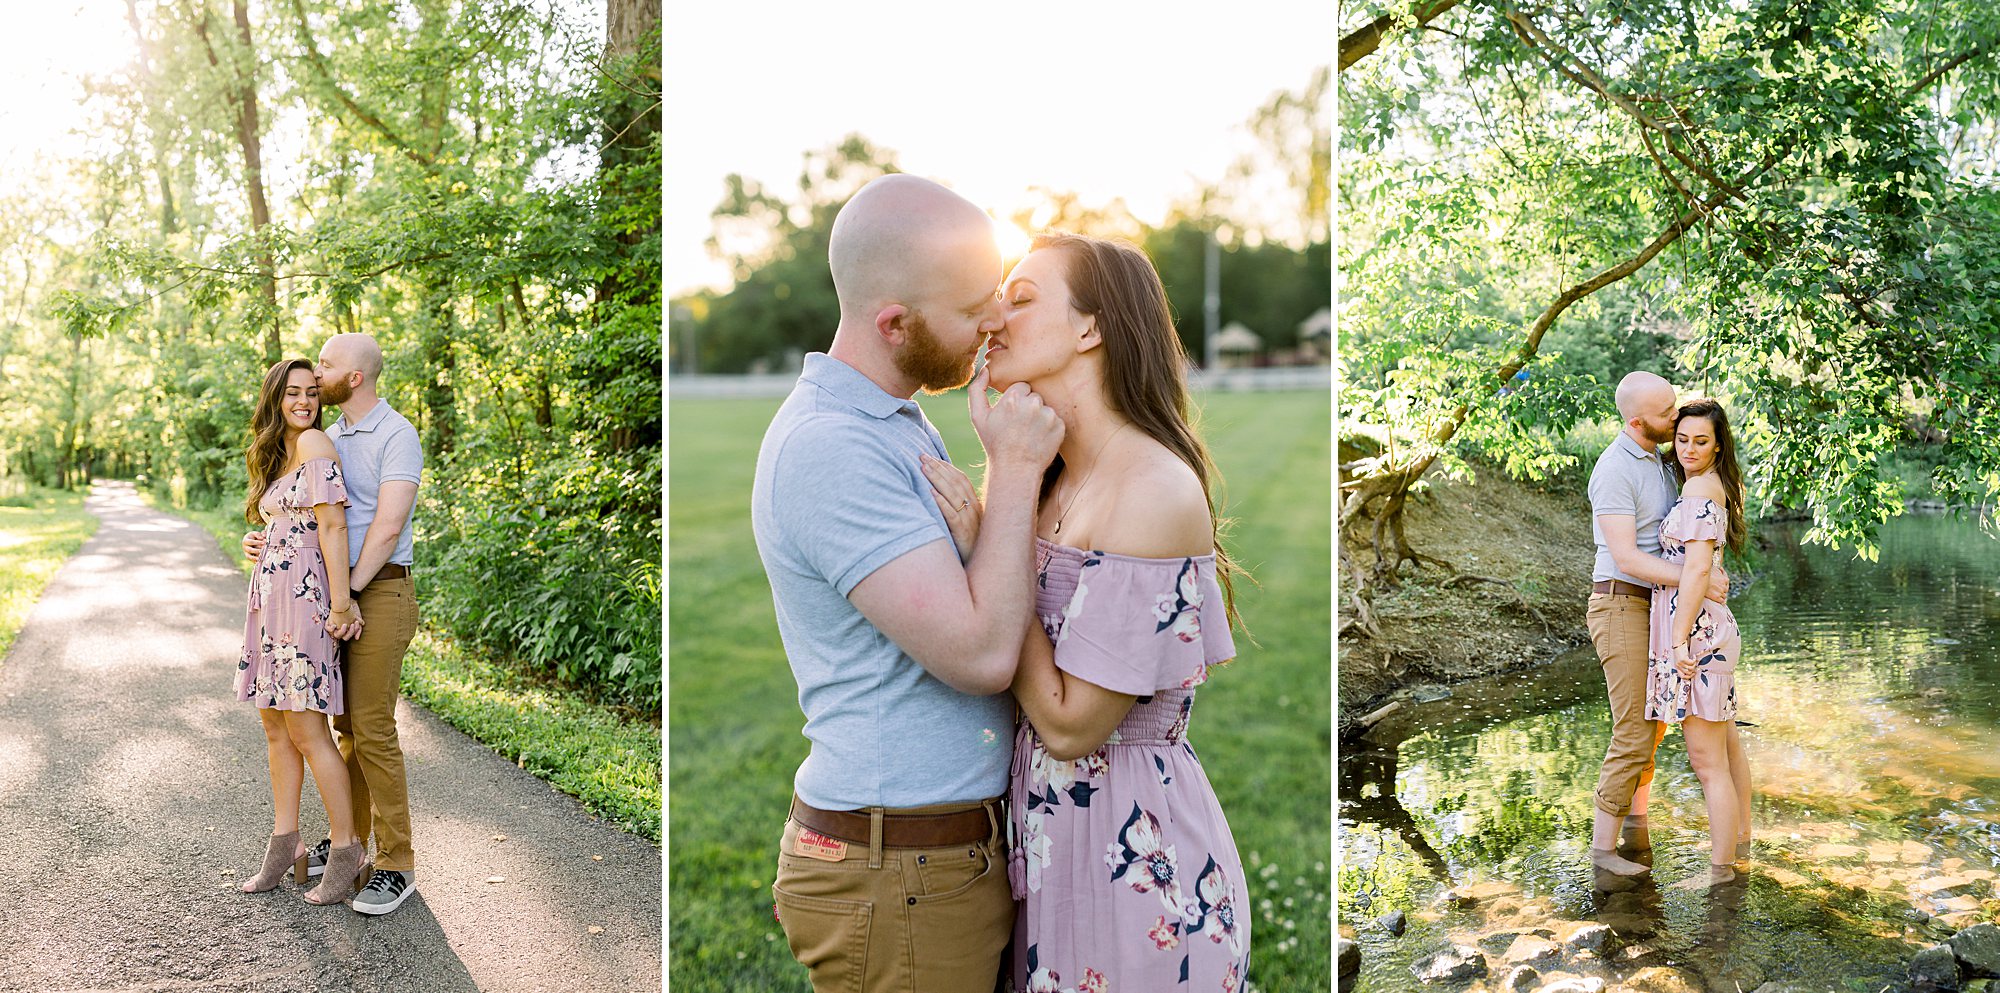 Engagement photos at Arbuckle Park in Brownsburg, Indiana with Jennifer Council Photography. 